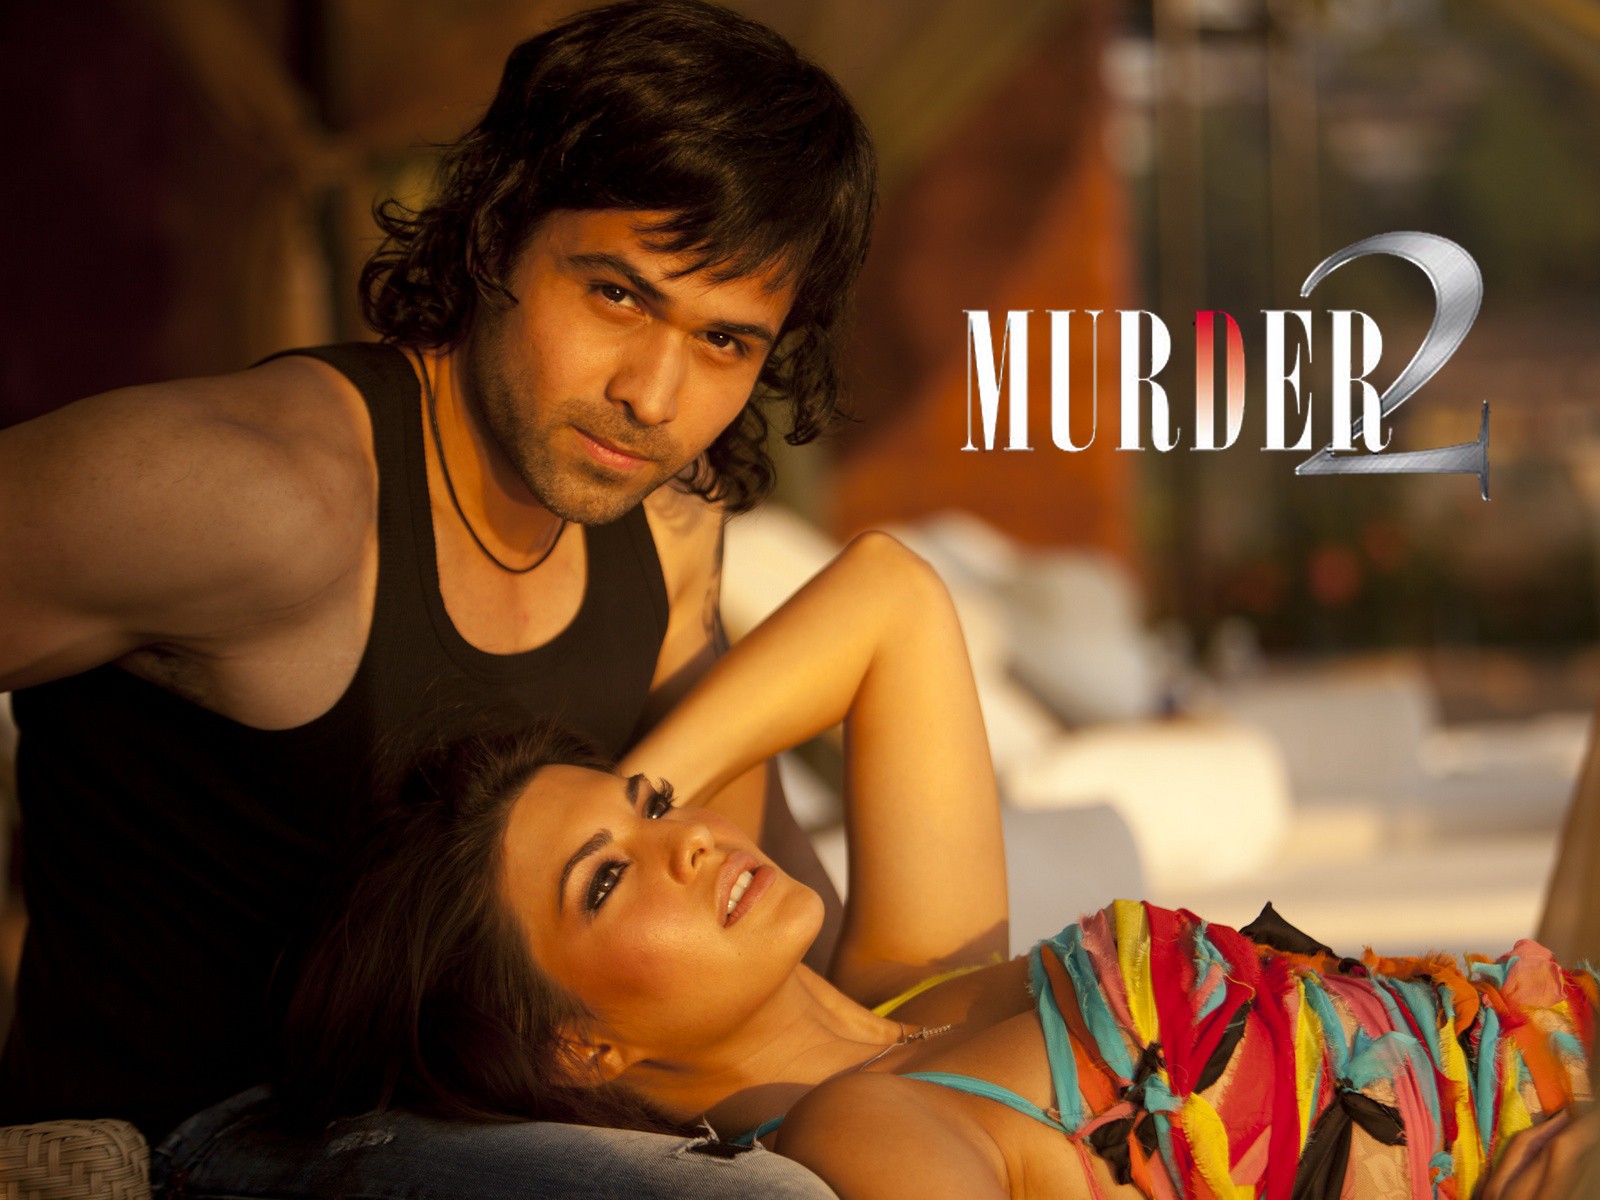 Murder 2 hot video free download - www.vcpwfahcjnh.cf